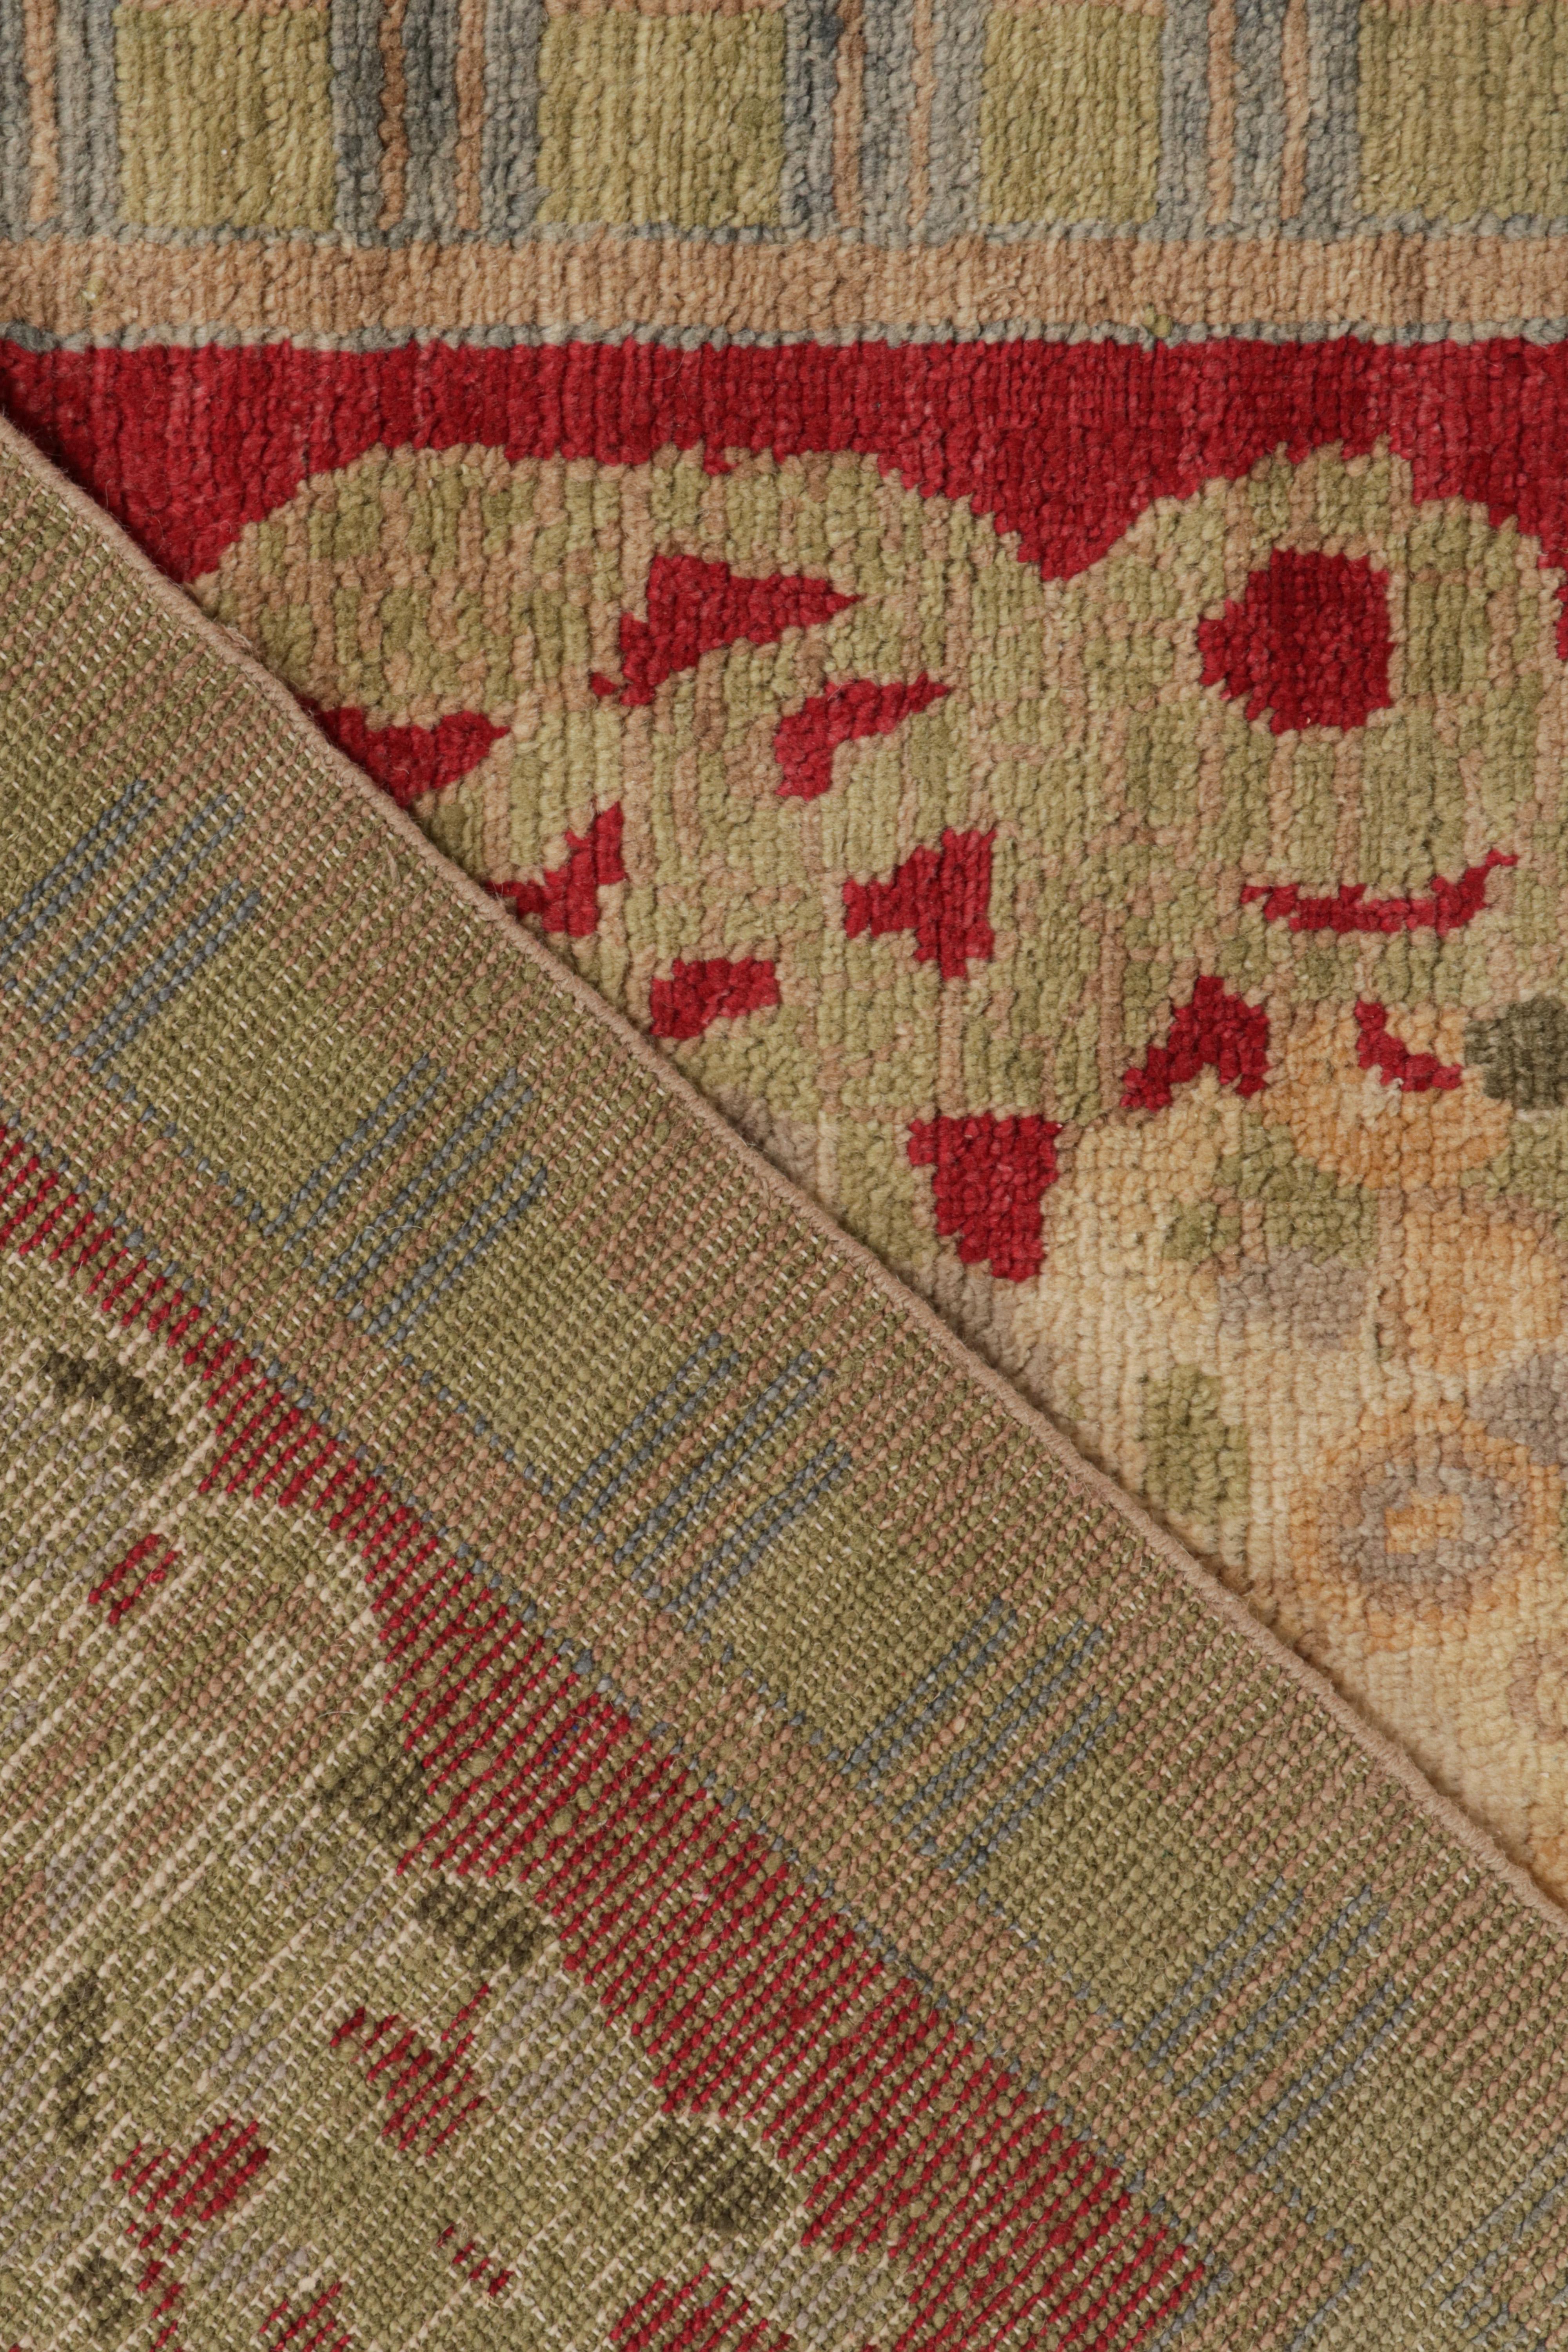 Wool Rug & Kilim’s French Style Art Deco Rug in Red, Green, Gold & Blue Patterns For Sale